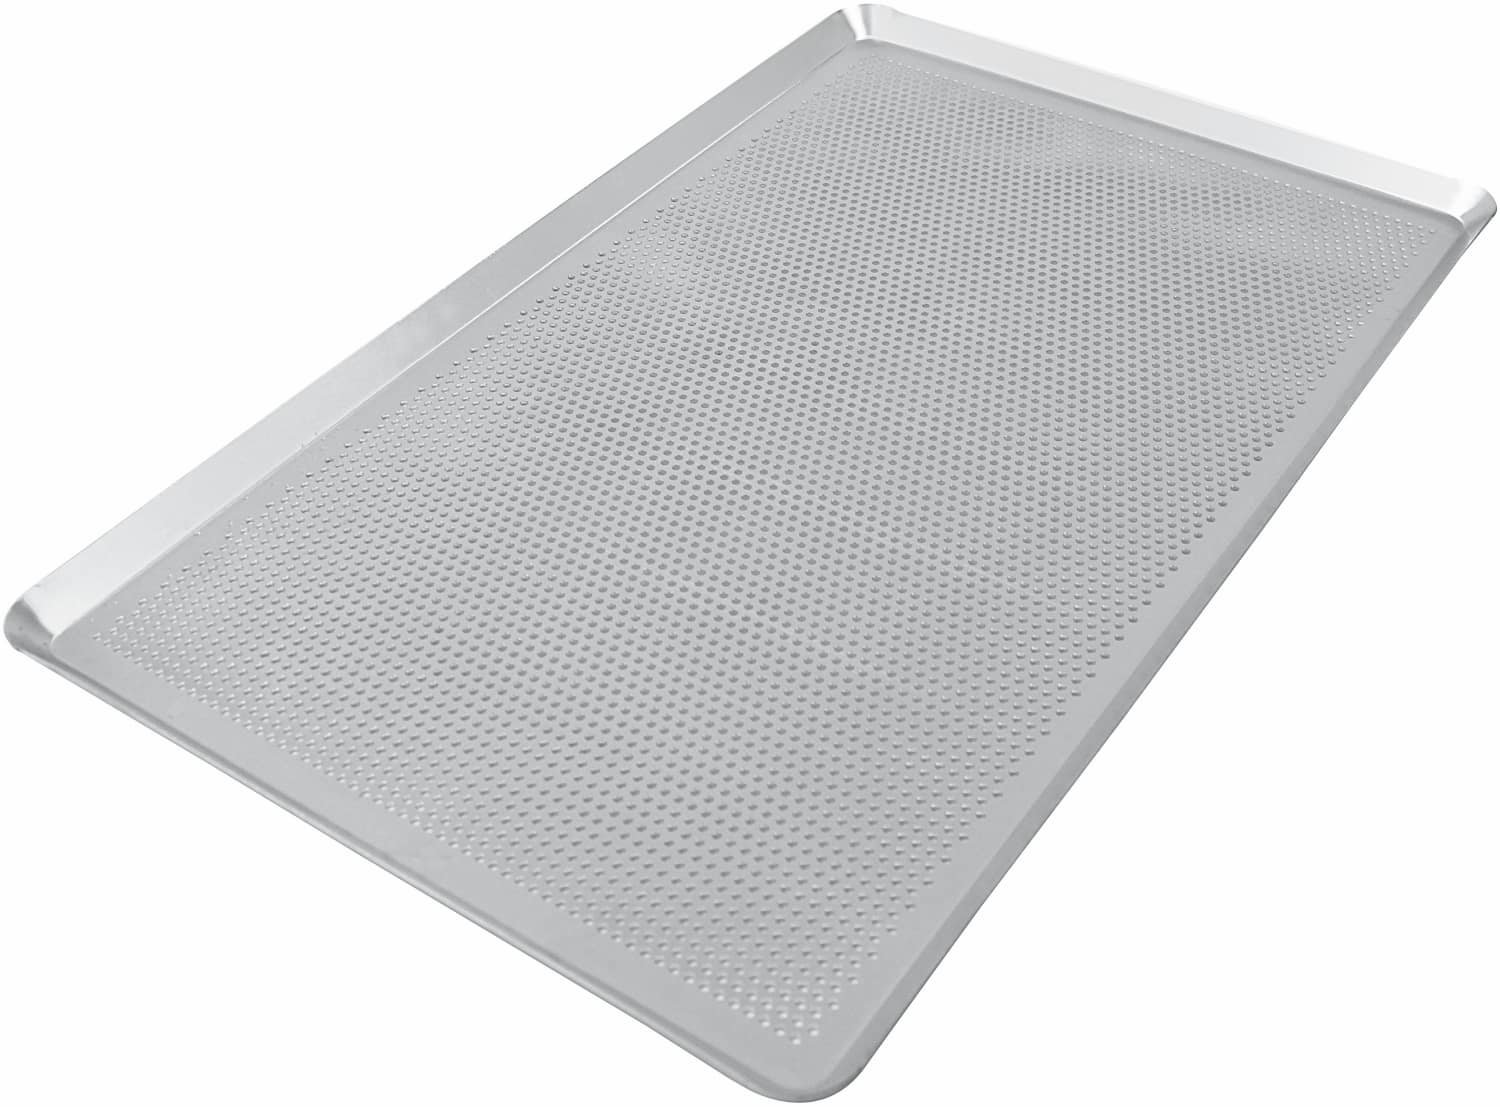 Baking tray 600 x 400 mm uncoated